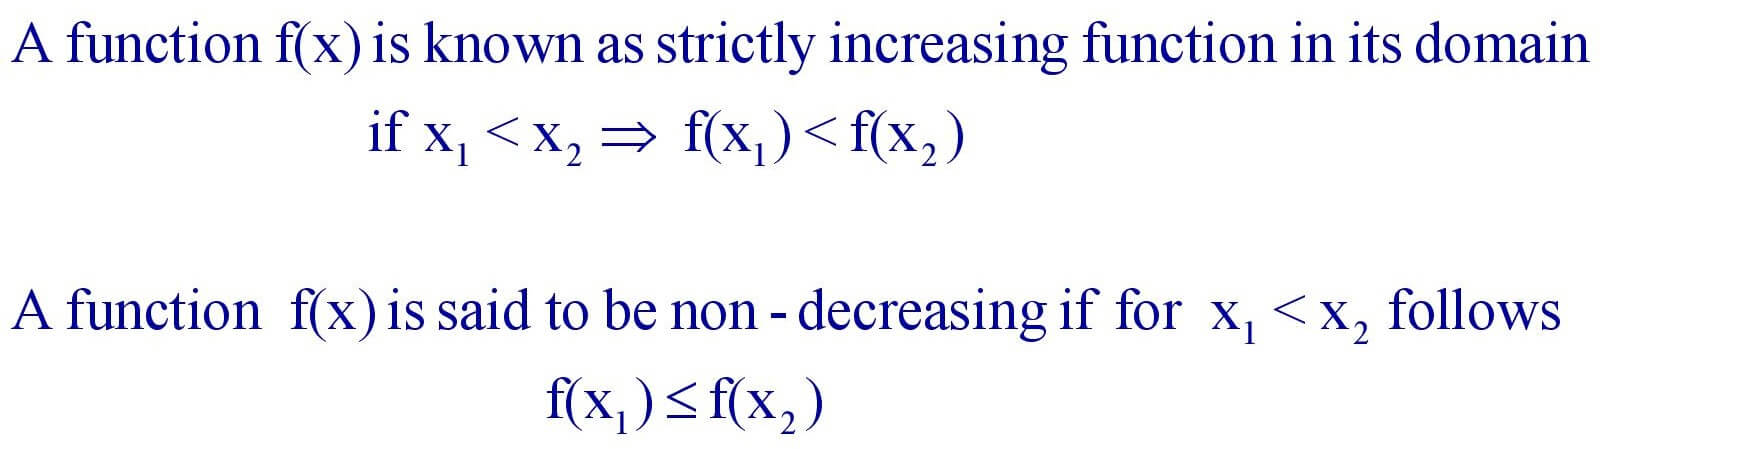 Strictly increasing function